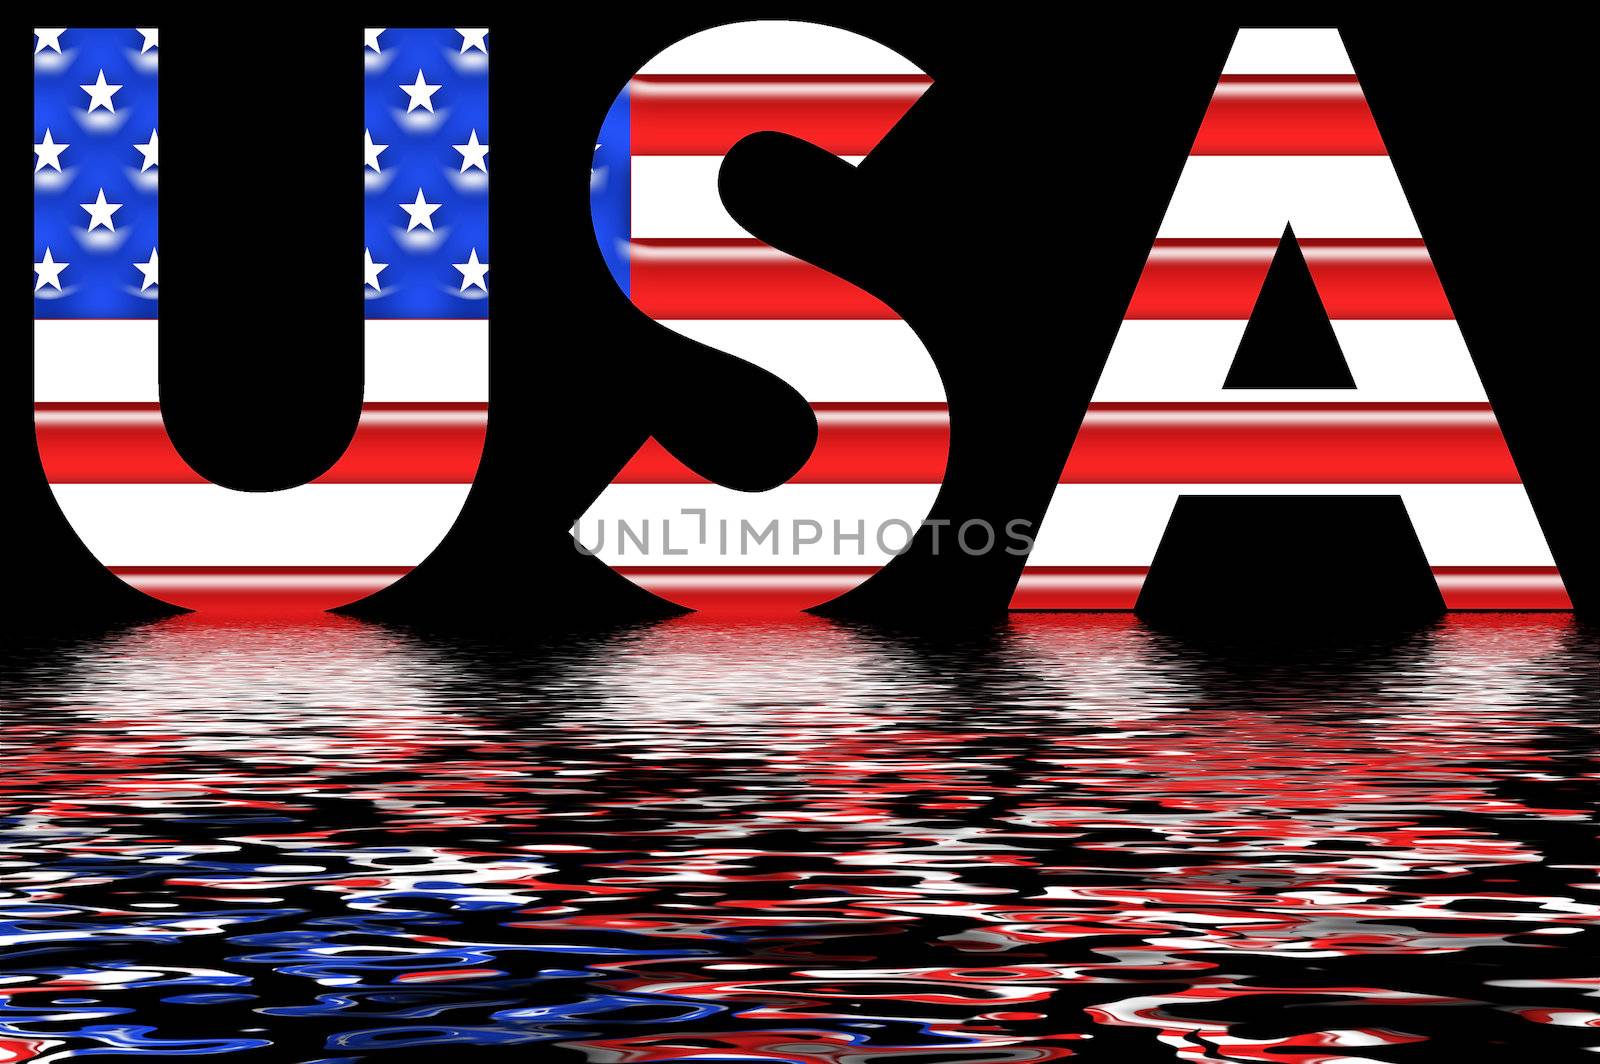 USA word with flag background and reflection by raalves